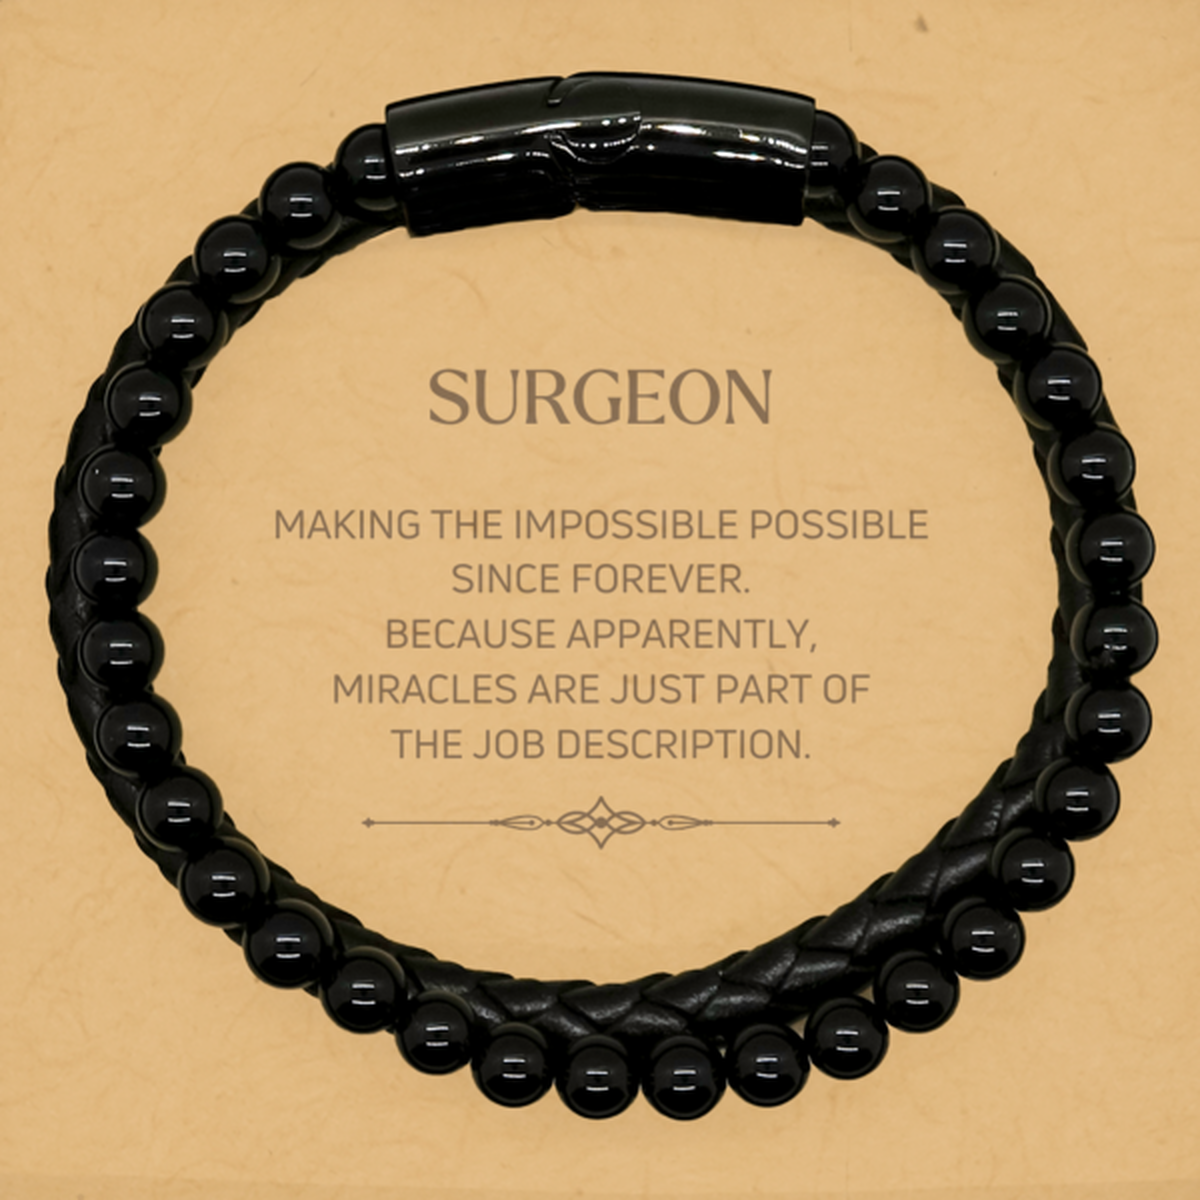 Funny Surgeon Gifts, Miracles are just part of the job description, Inspirational Birthday Stone Leather Bracelets For Surgeon, Men, Women, Coworkers, Friends, Boss